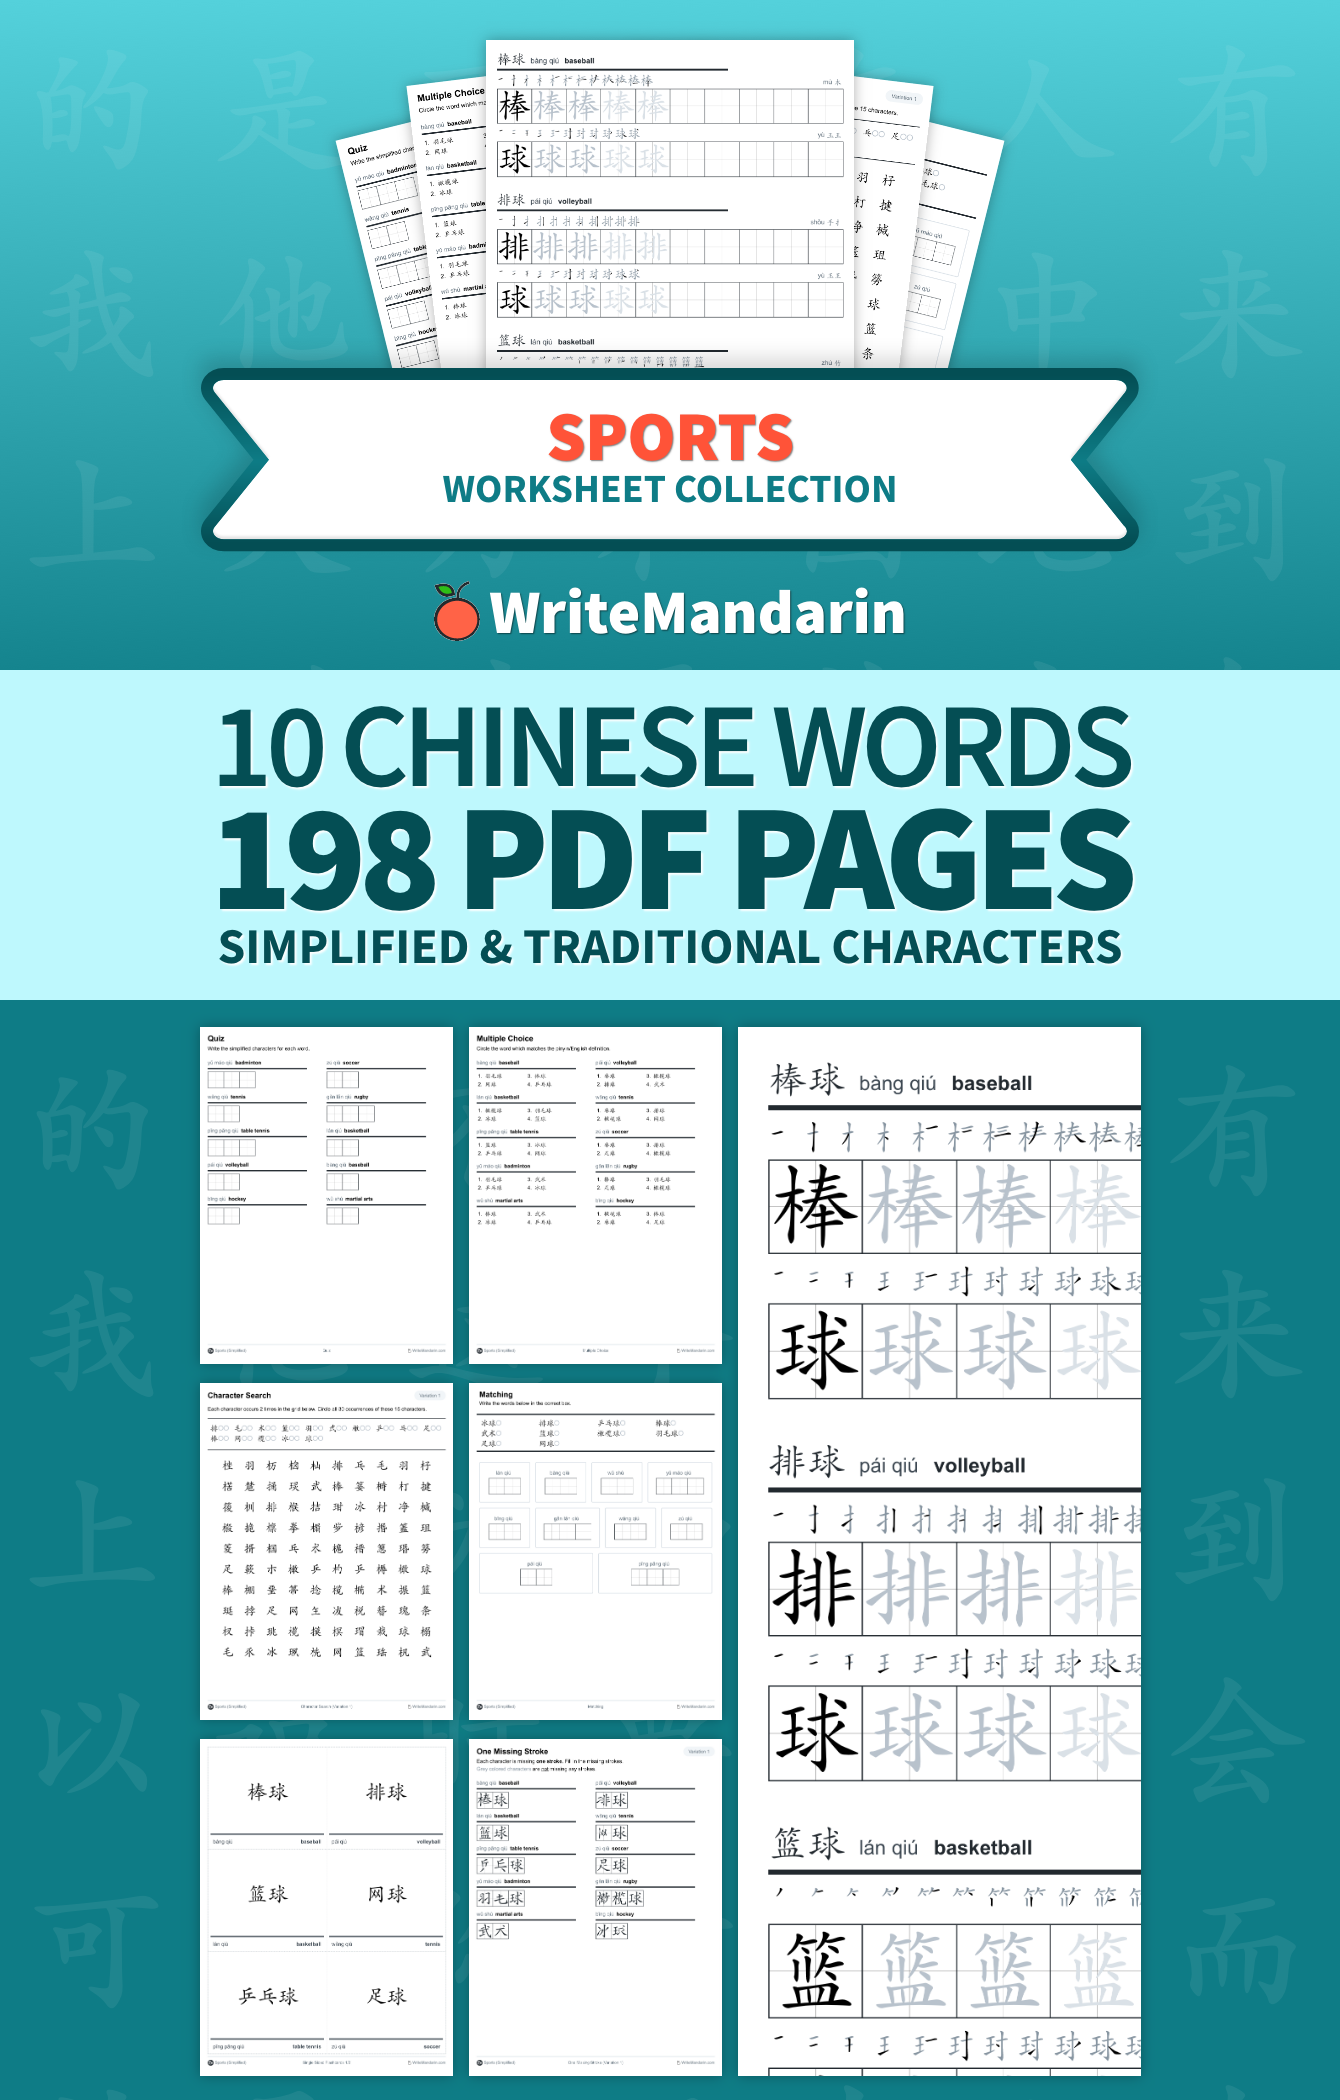 Preview image of Sports worksheet collection